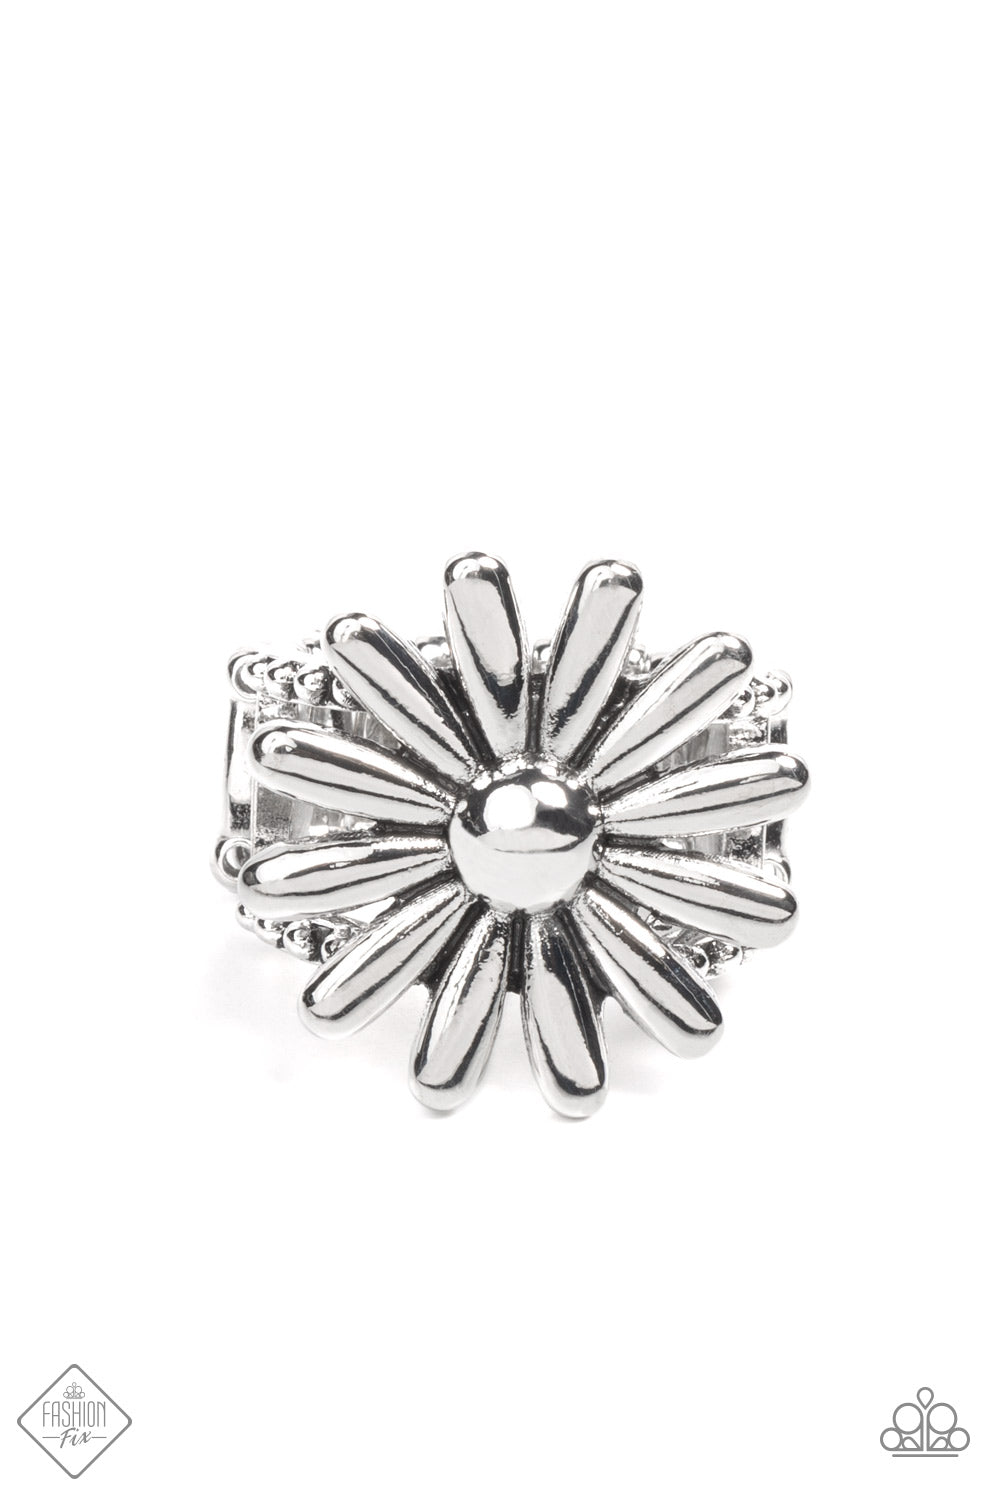 Growing Steady Ring by Paparazzi Accessories